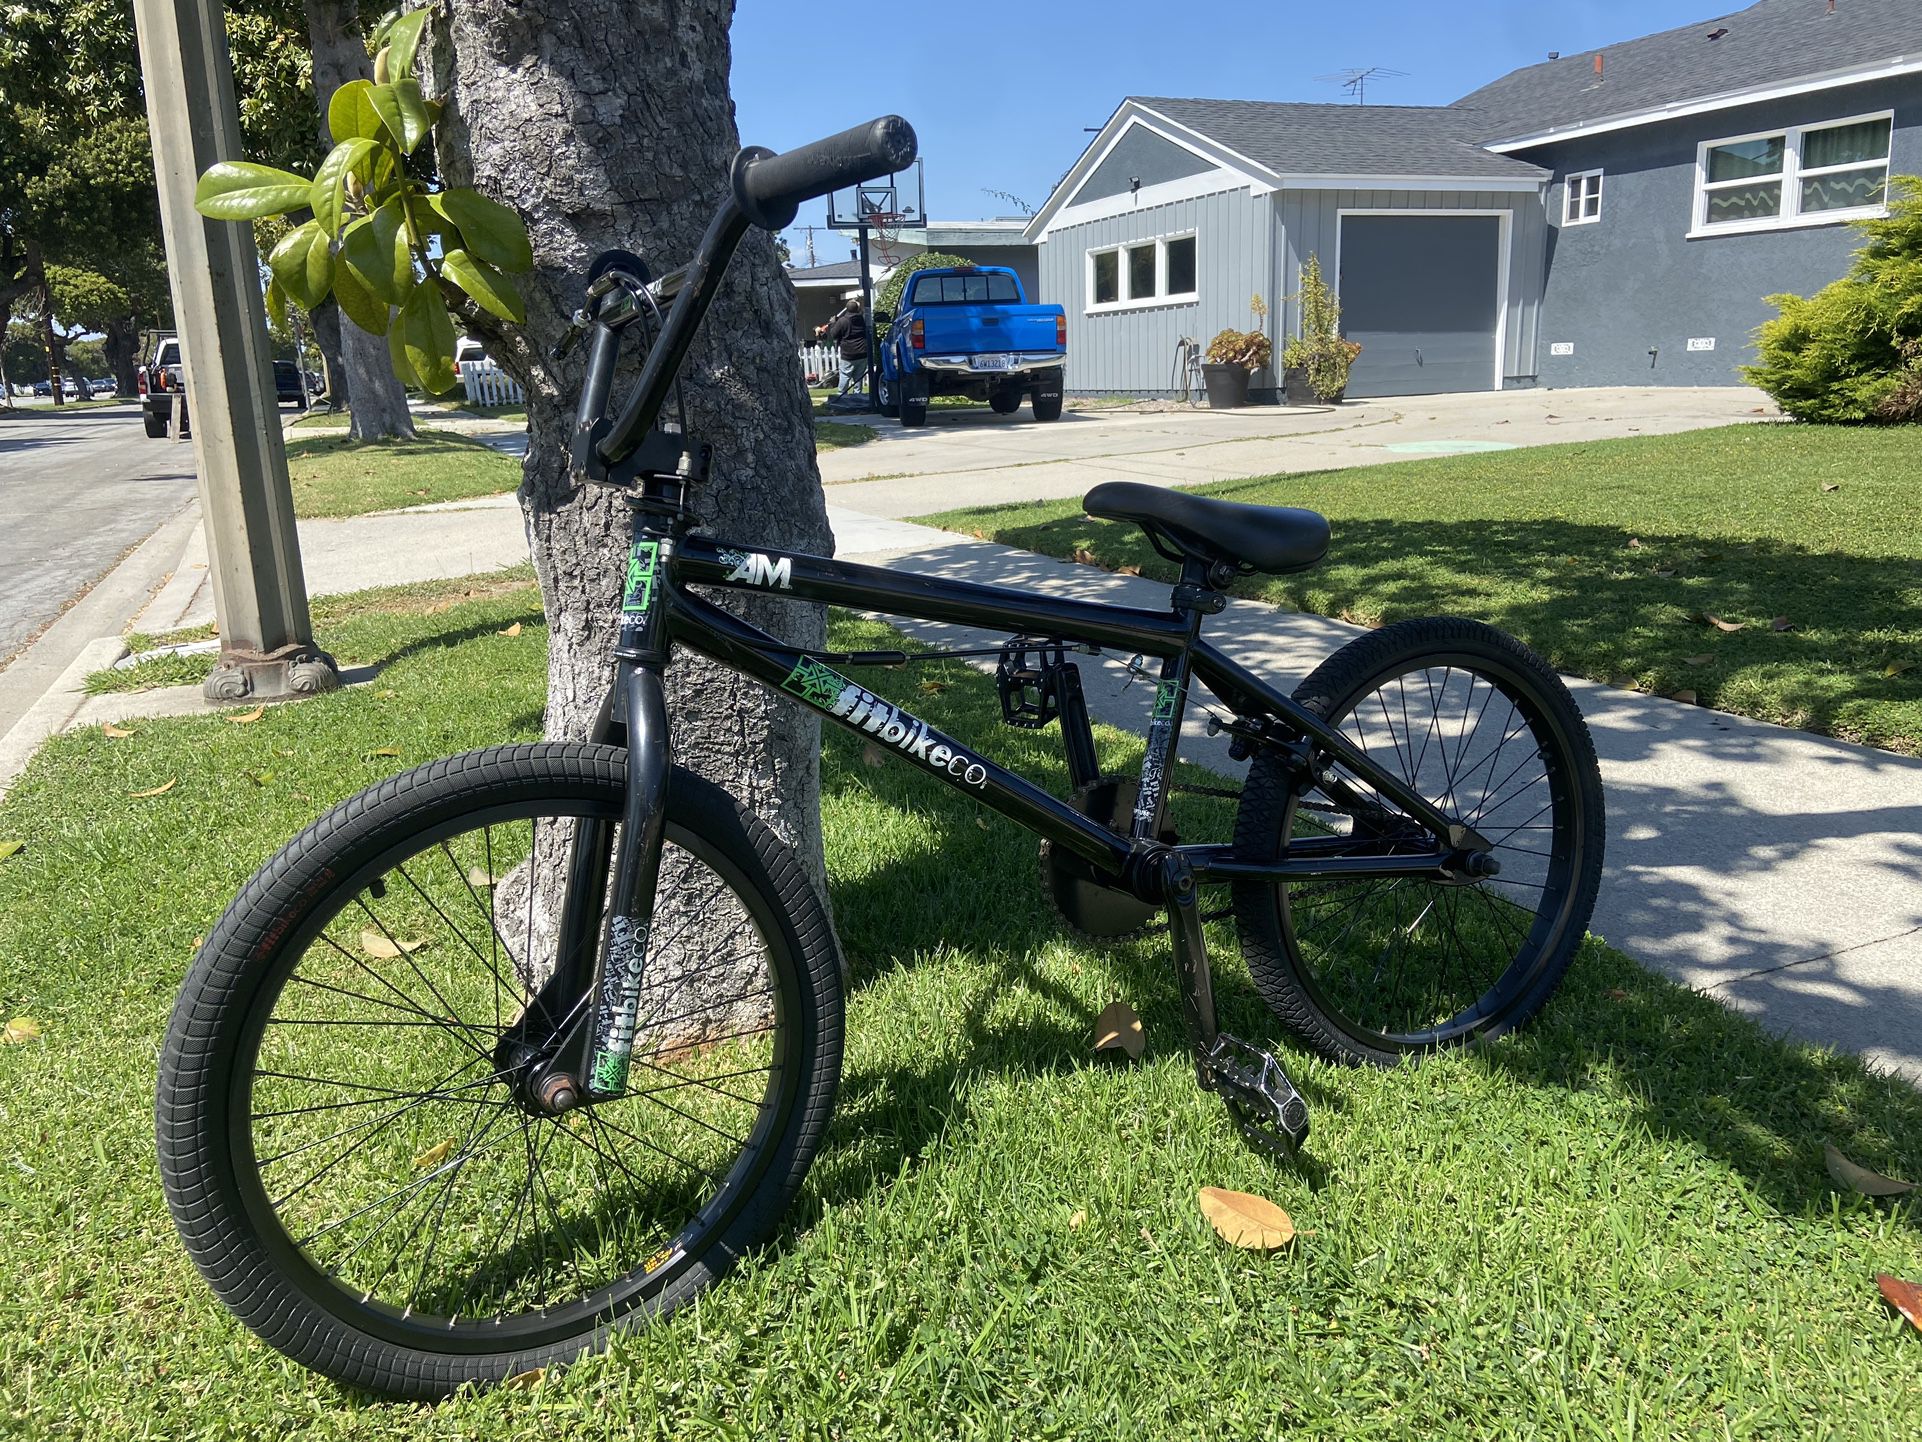 20 Inch Fitbike Co. AM Series (small Frame) $50